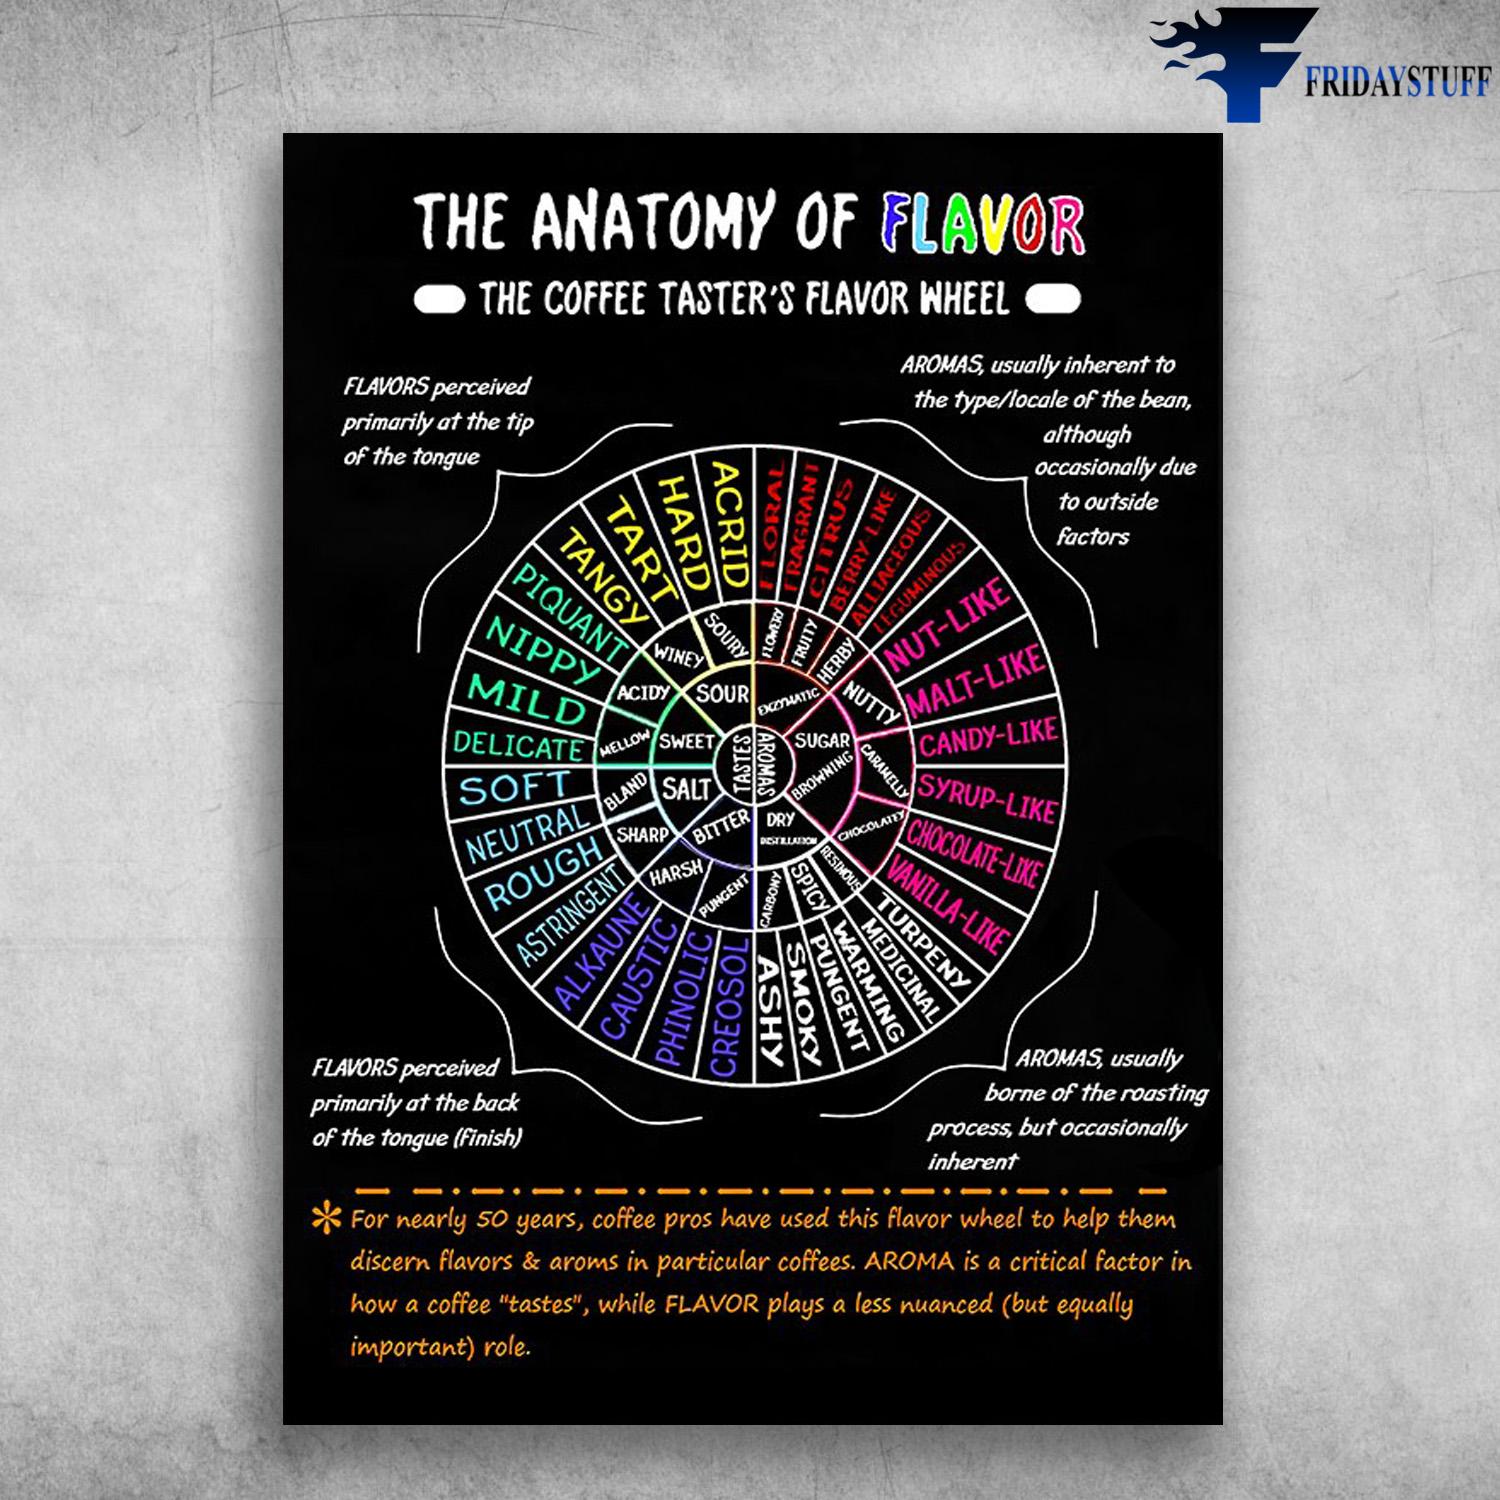 The Anatomy Of Flavor, The Coffee Taster's Flavor Wheel, Flavors Perceived Primarily, At The Tip Of The Tongue